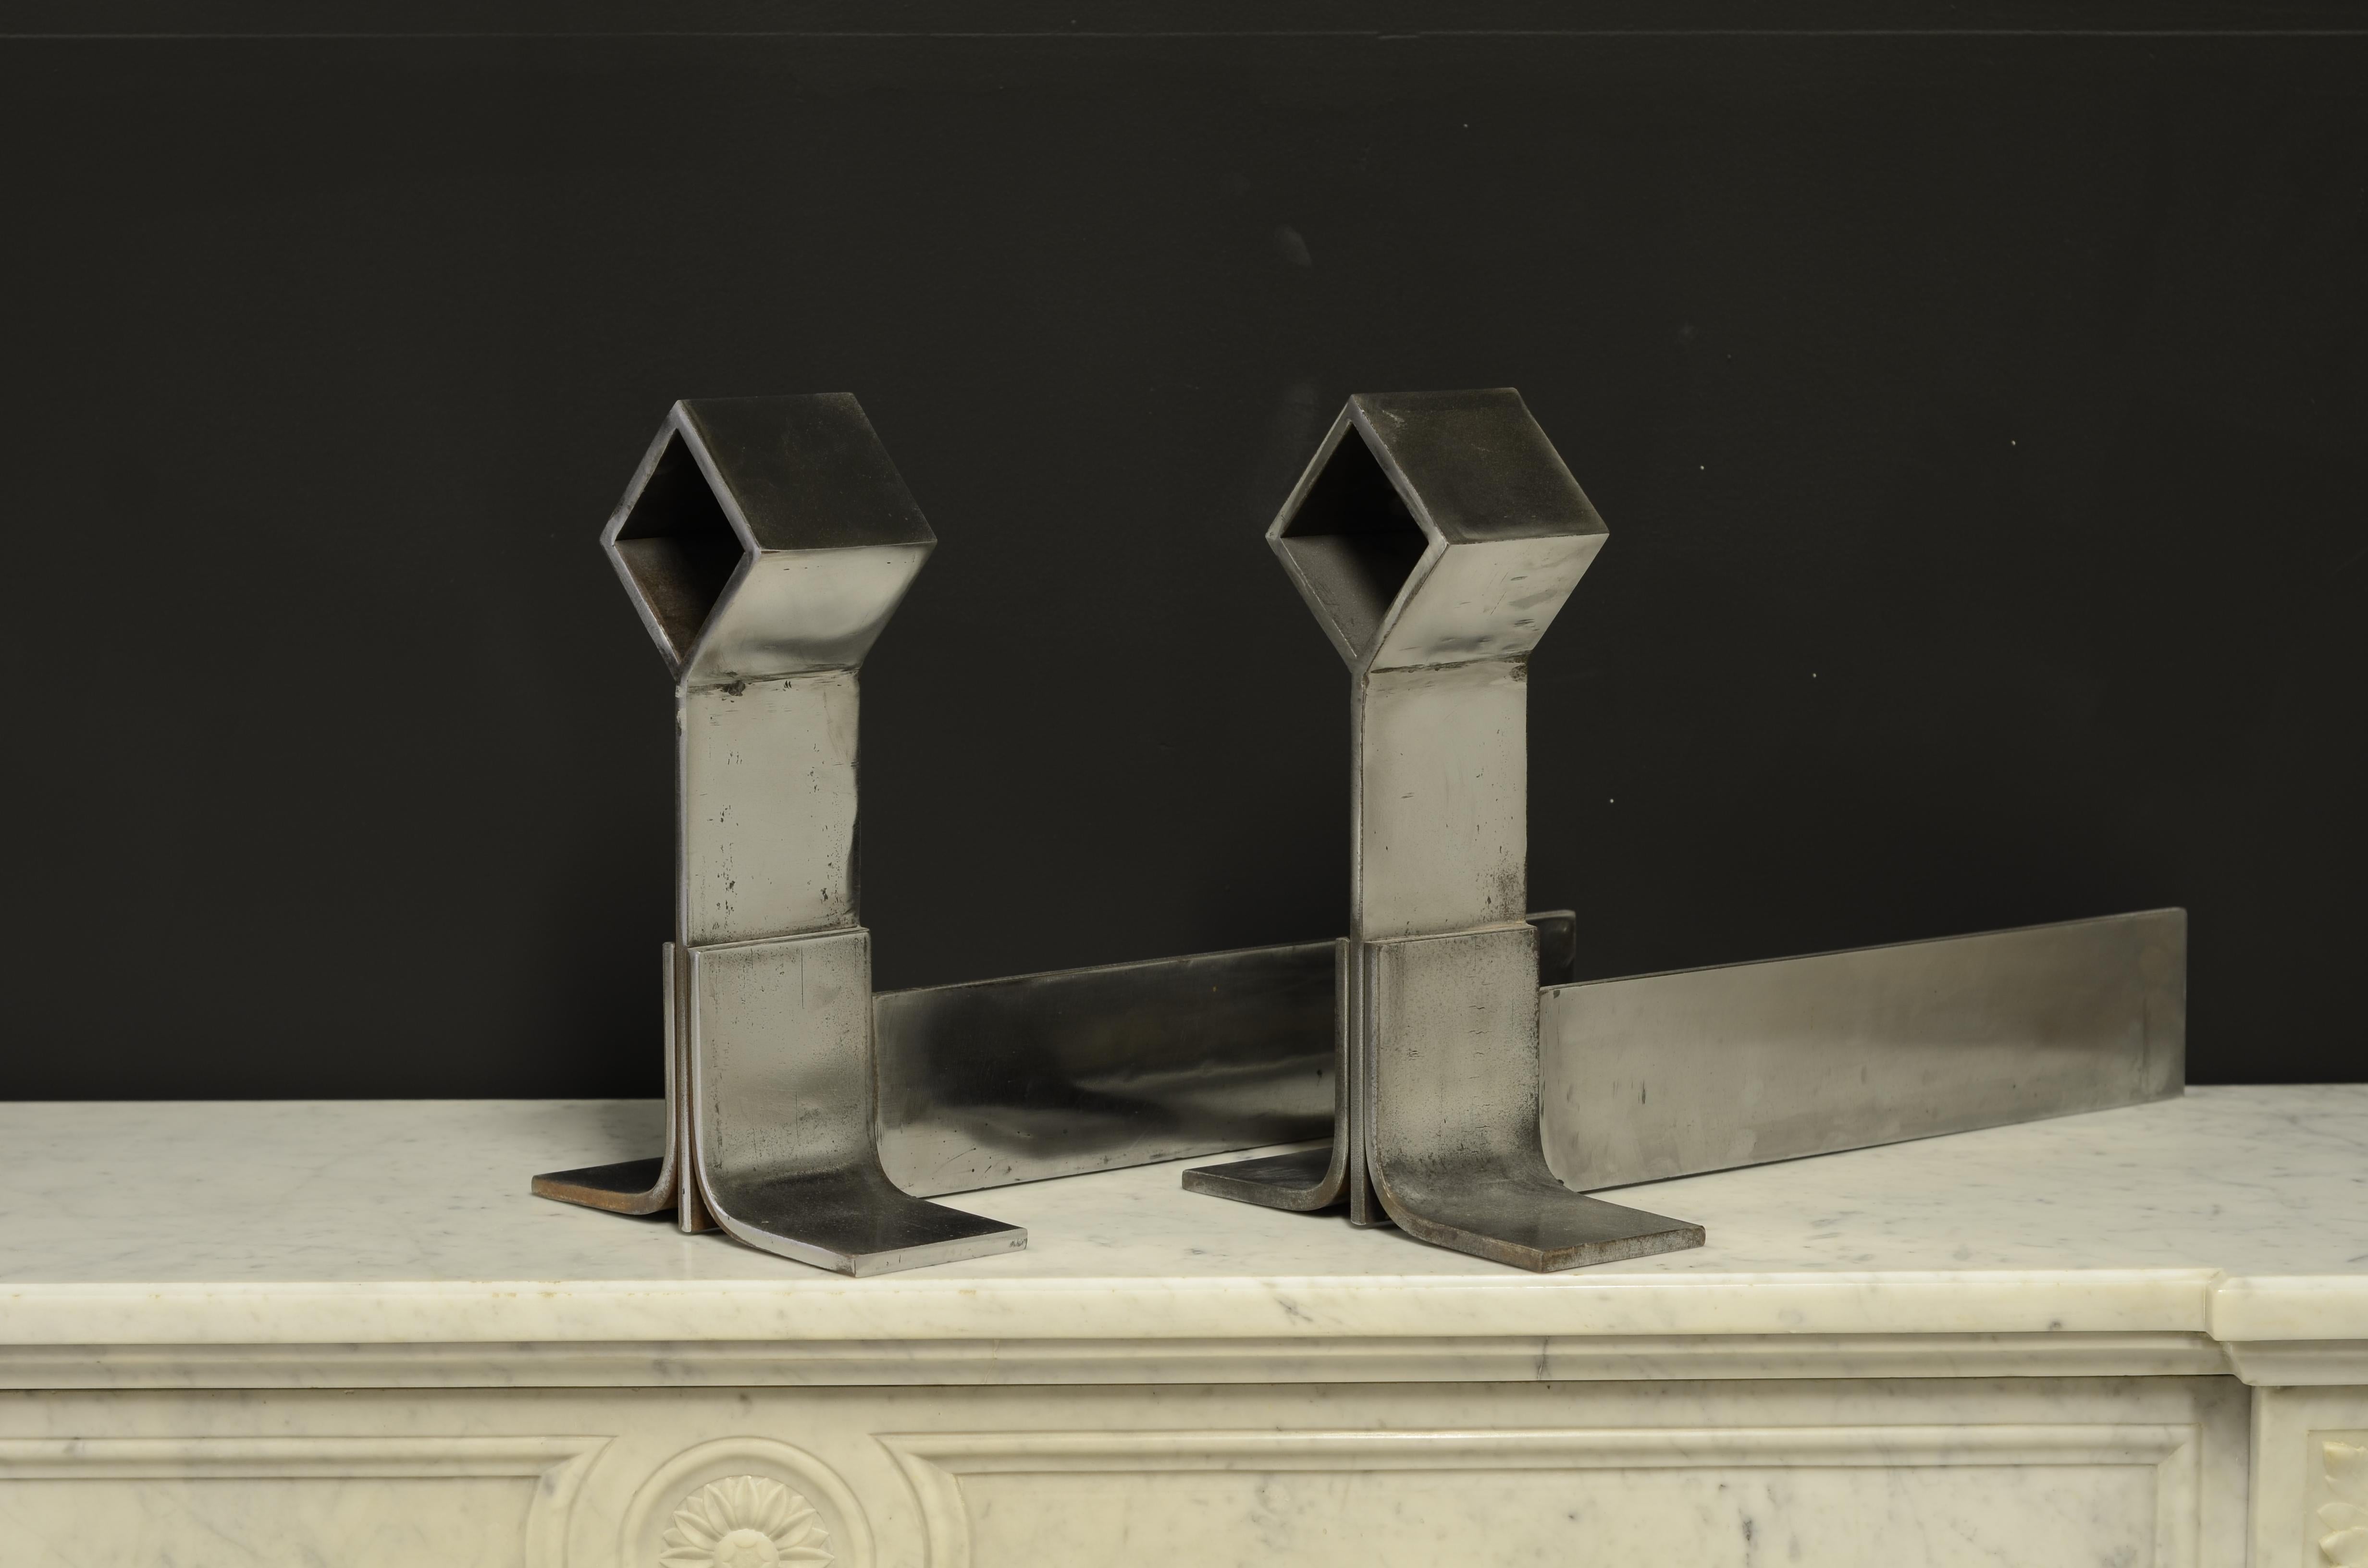 Super stylish set of brushed steel mid- century modernist andirons or firedogs.
The soft shine and great patina make these andirons really stand out in your mantel.

Prefect condition and great size.
France, 1960.

Sold by Schermerhorn Antique